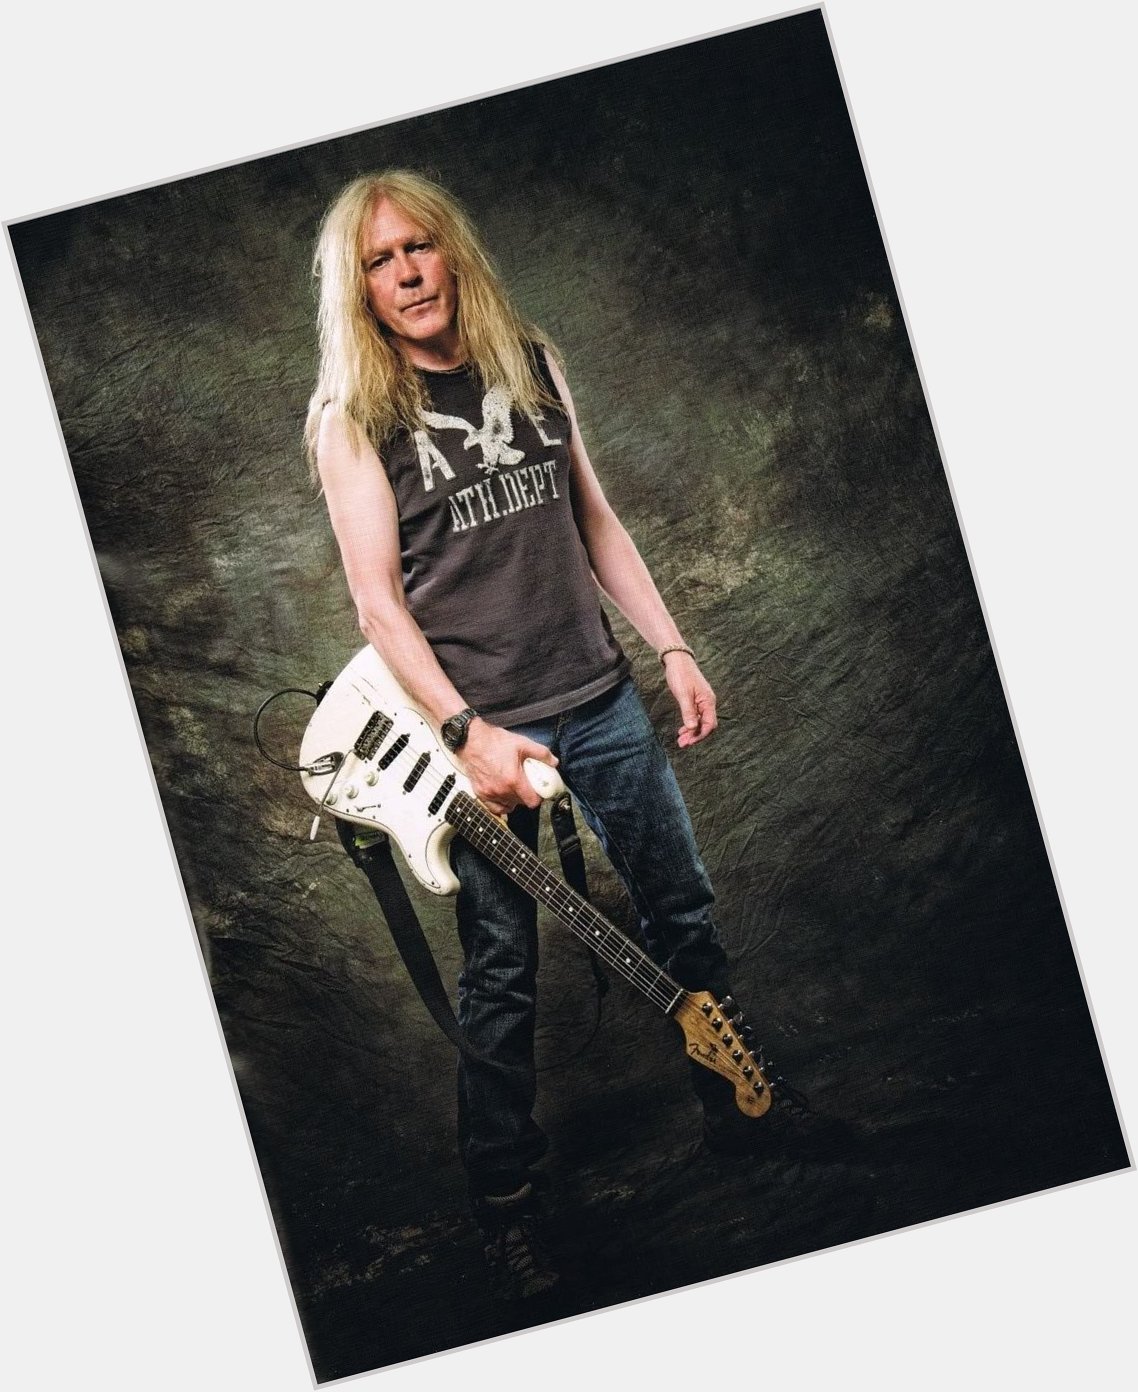 Today is a special day HAPPY BIRTHDAY JANICK GERS OF IRON MAIDEN!!!! 